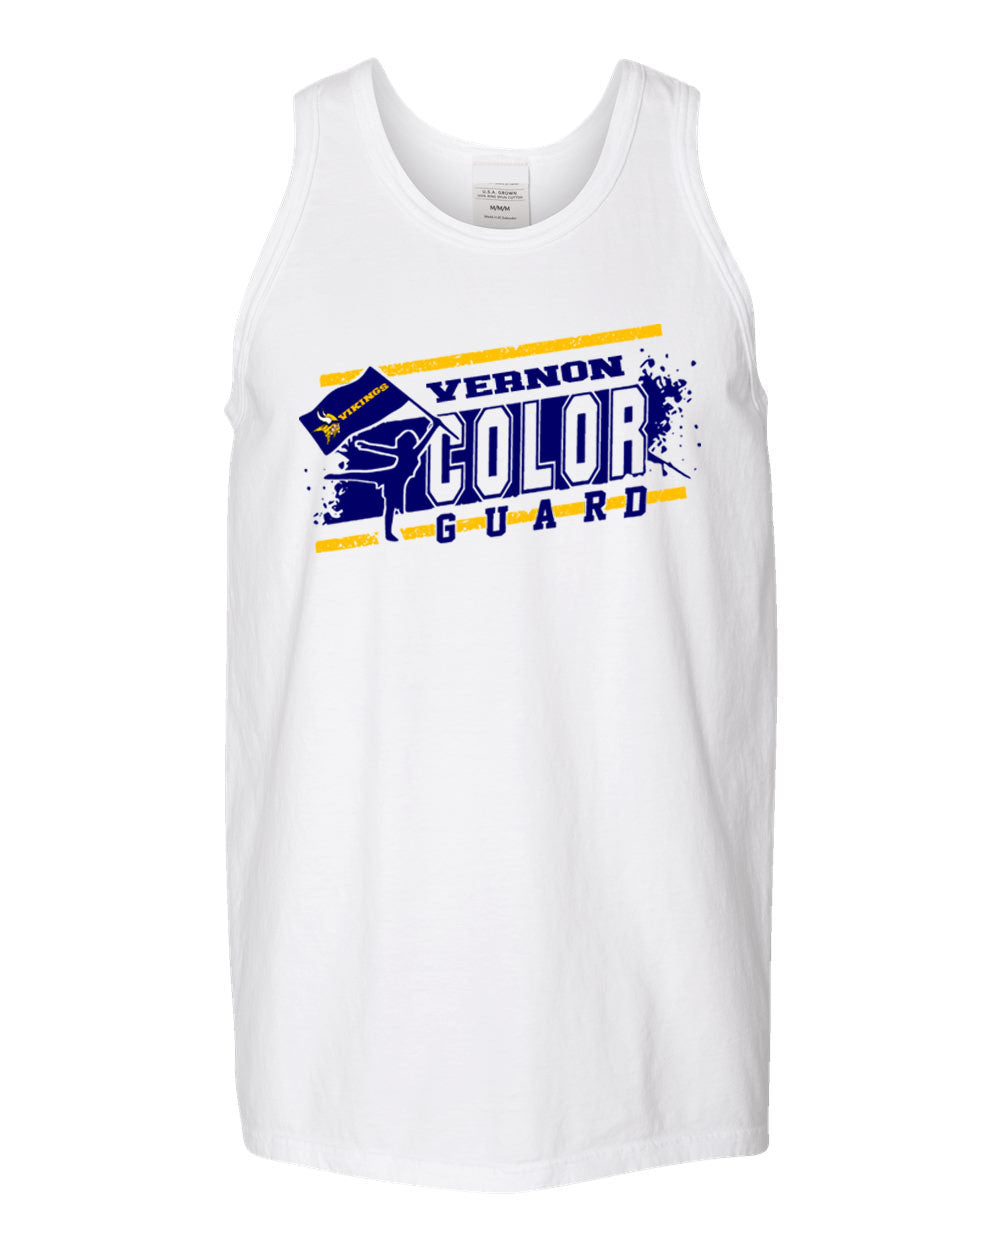 Vernon Marching Band design 4 Muscle Tank Top